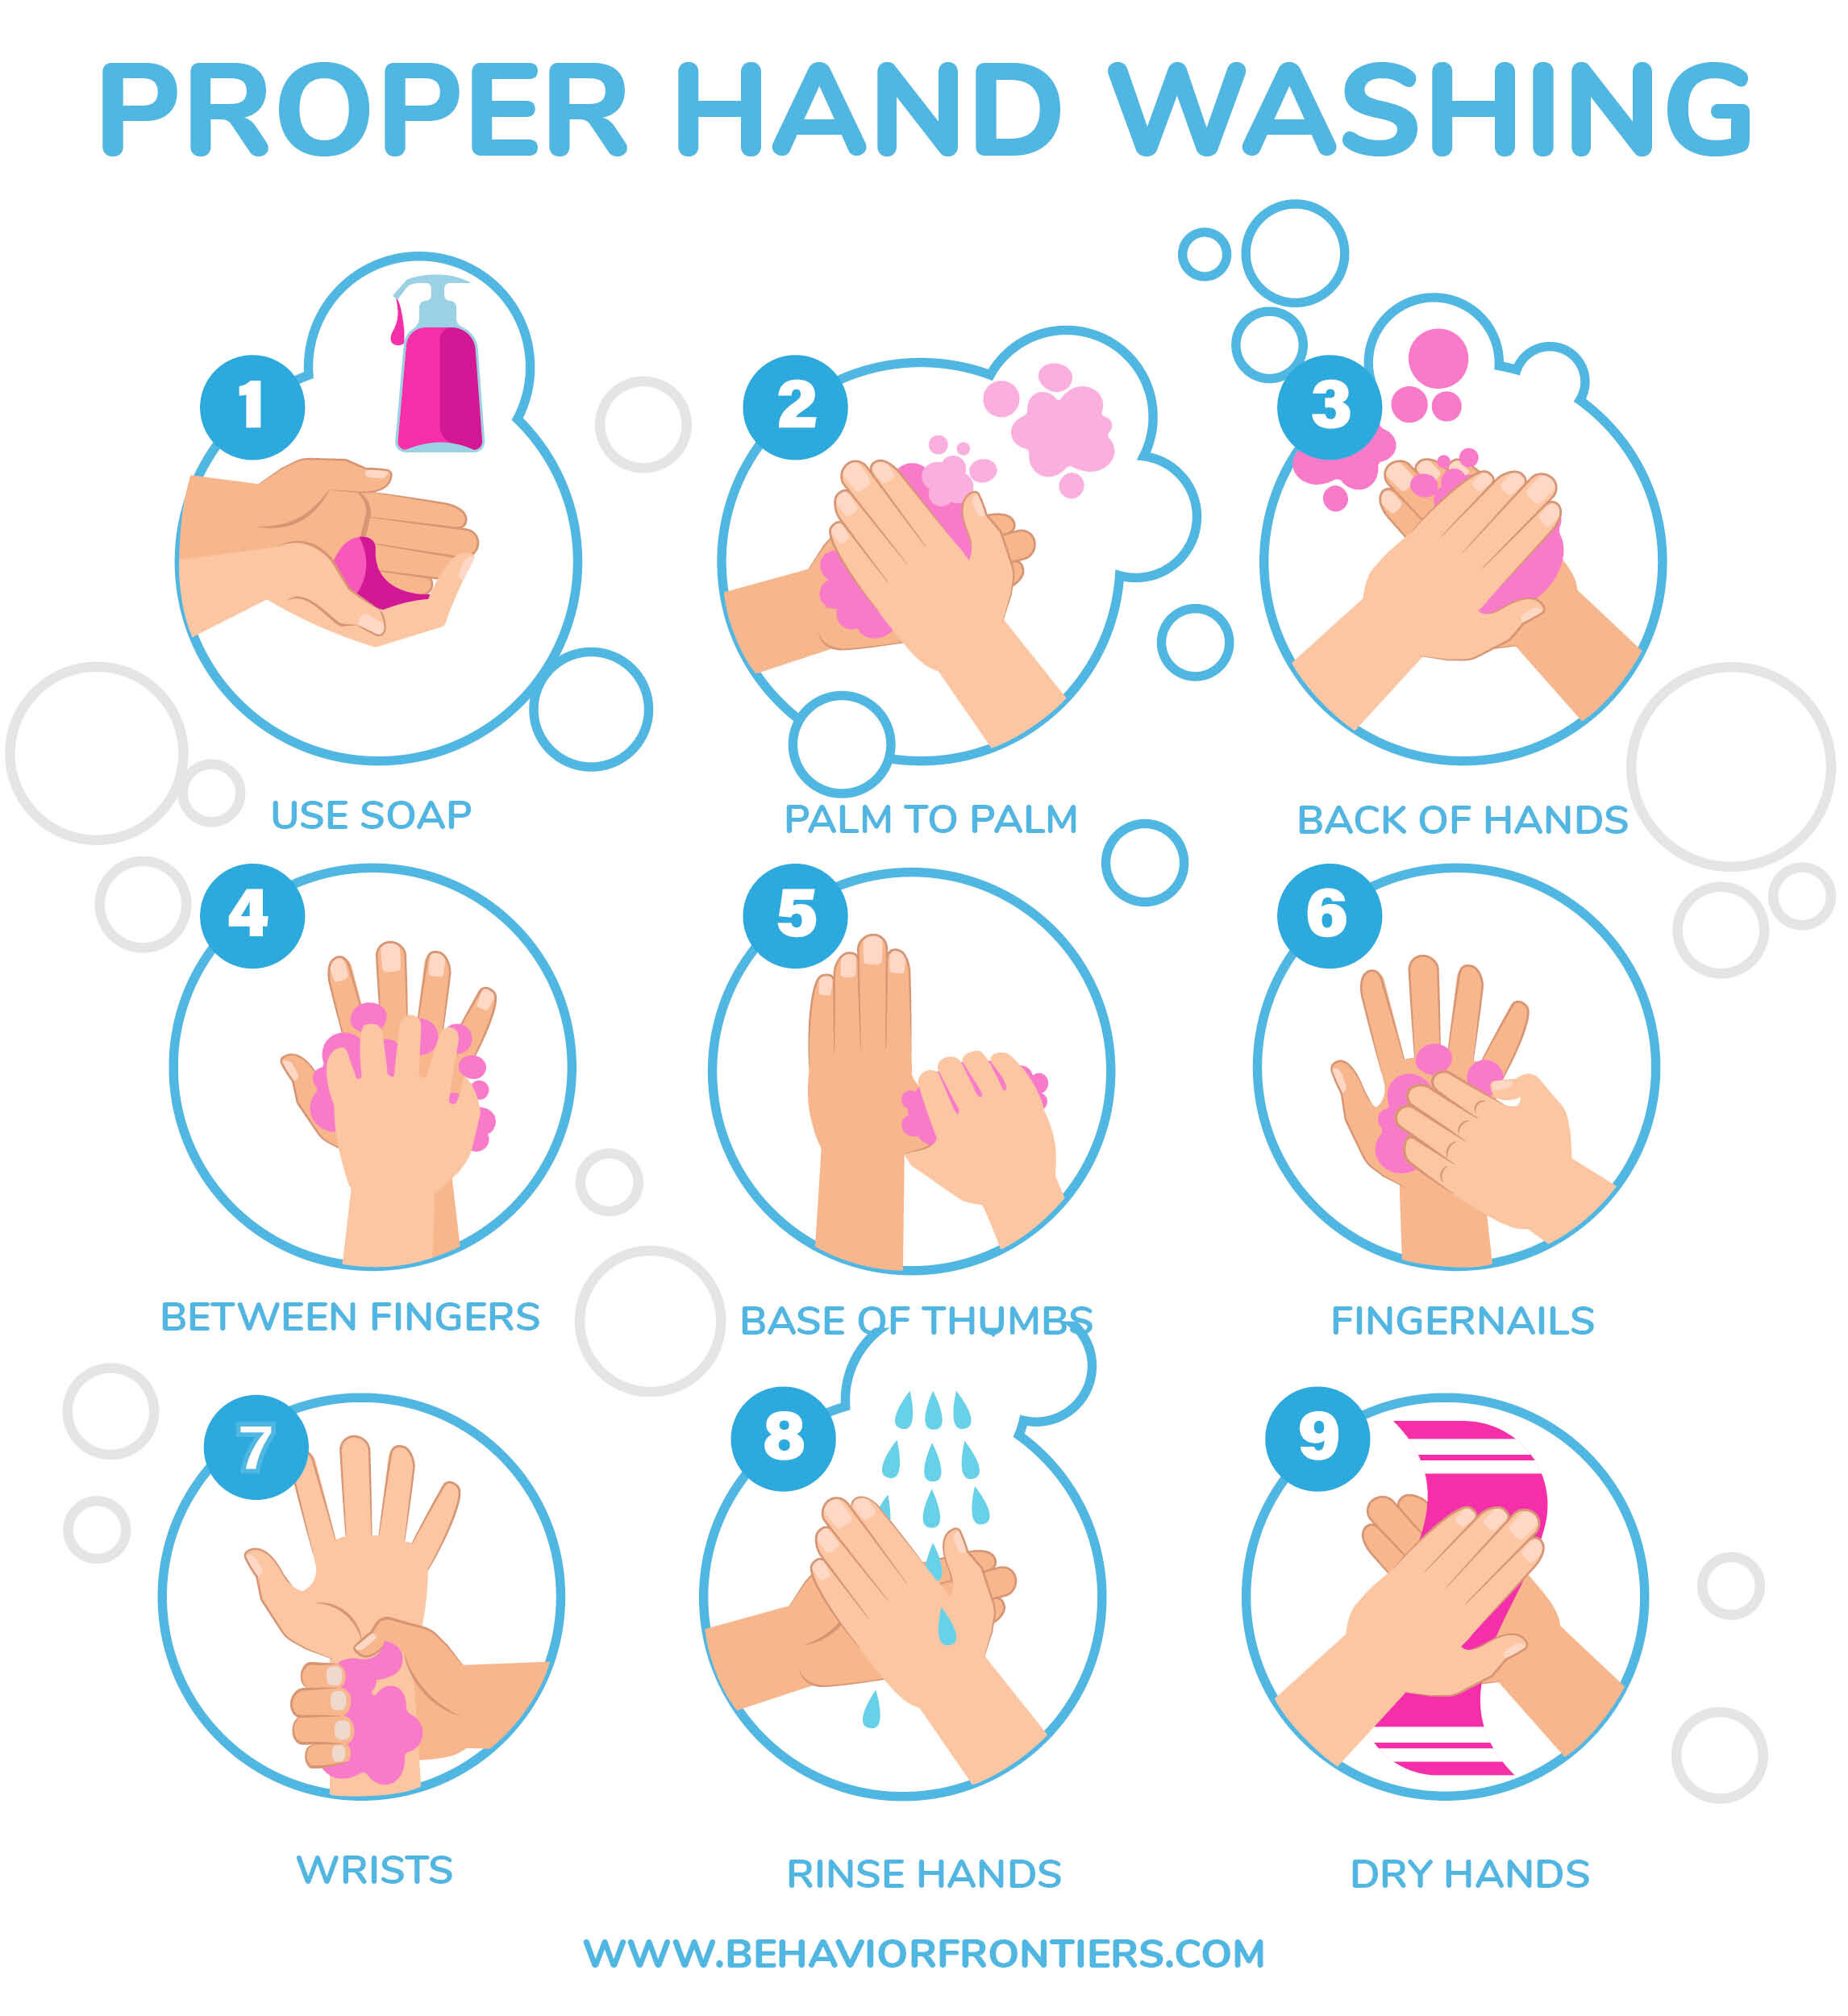 How To Help Prevent The Spread Of Coronavirus Wash Your Hands